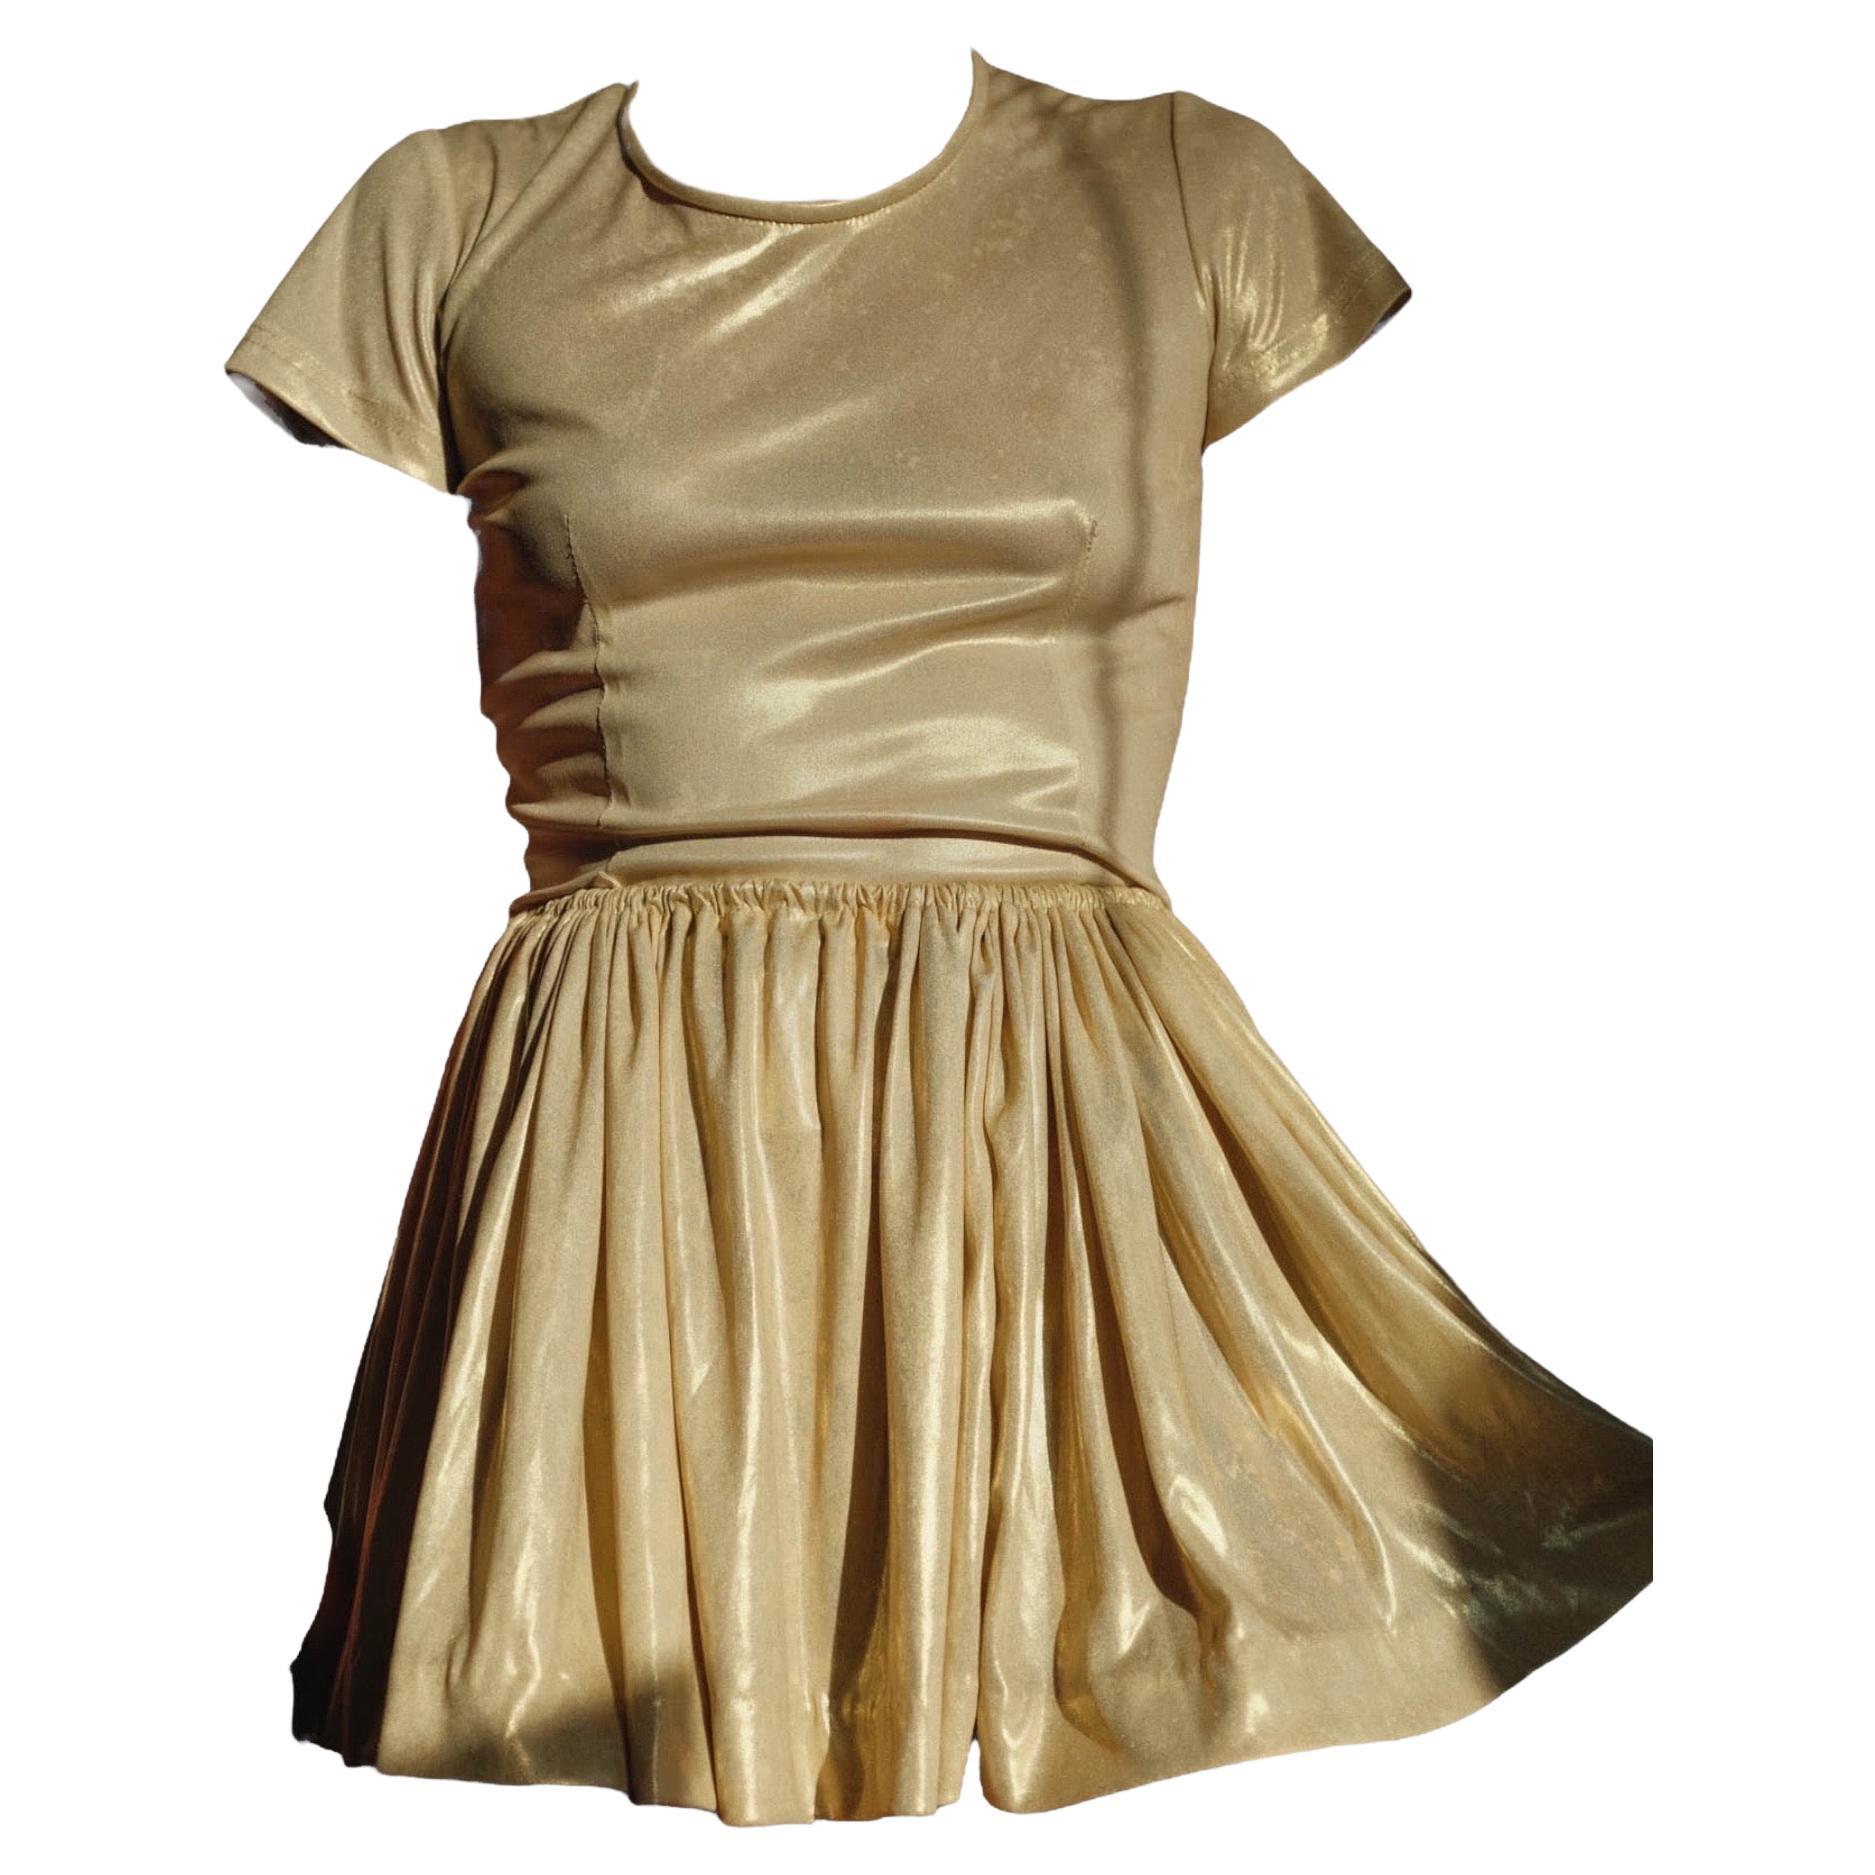 1988 SS Pagan Collection Vivienne Westwood Gold Mini Skirt ensemble 
Short sleeve T-shirt and Ruffle miniskirt 
Absolute show stopper piece 
Archival collectors item

OK vintage condition, moderate to heavy wear to be expected of used item this age